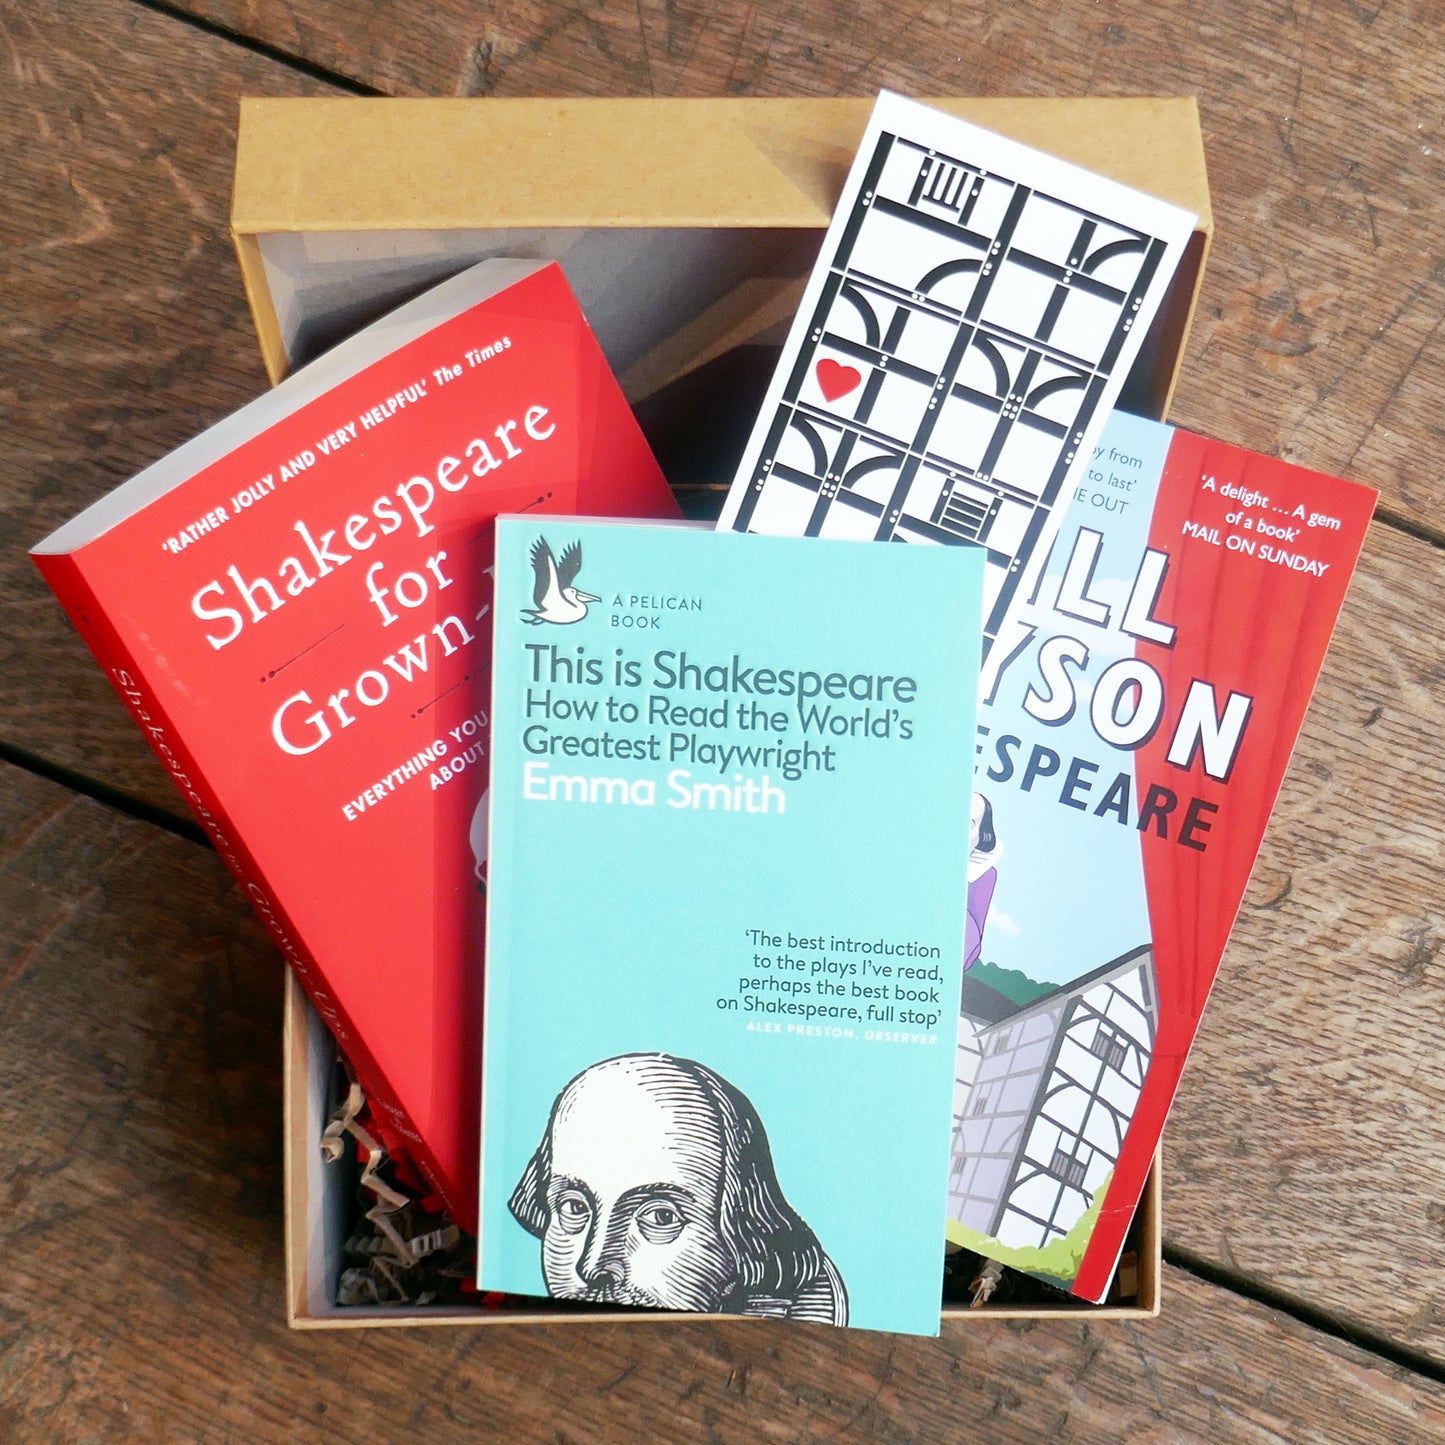 Kraft gift box containing three books about Shakespeare and his work; Shakespeare for Grown-ups, This is Shakespeare by Emma Smith, and Shakespeare by Bill Bryson, and a large format bookmark.